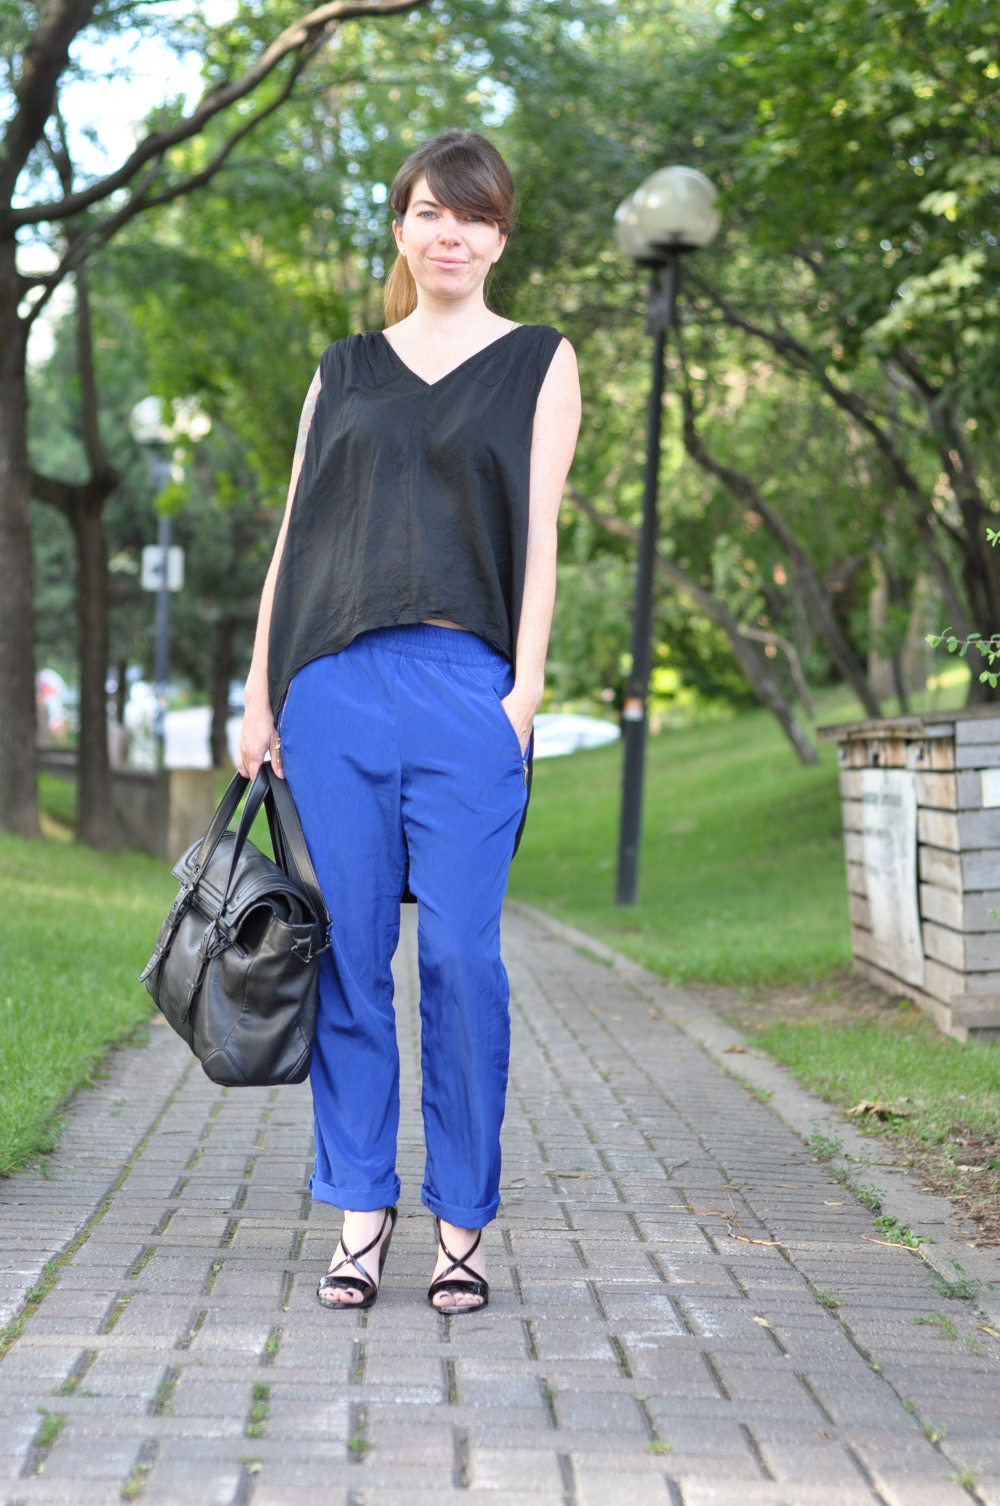 Black-&-Blue-Outfit-Trends-Setters